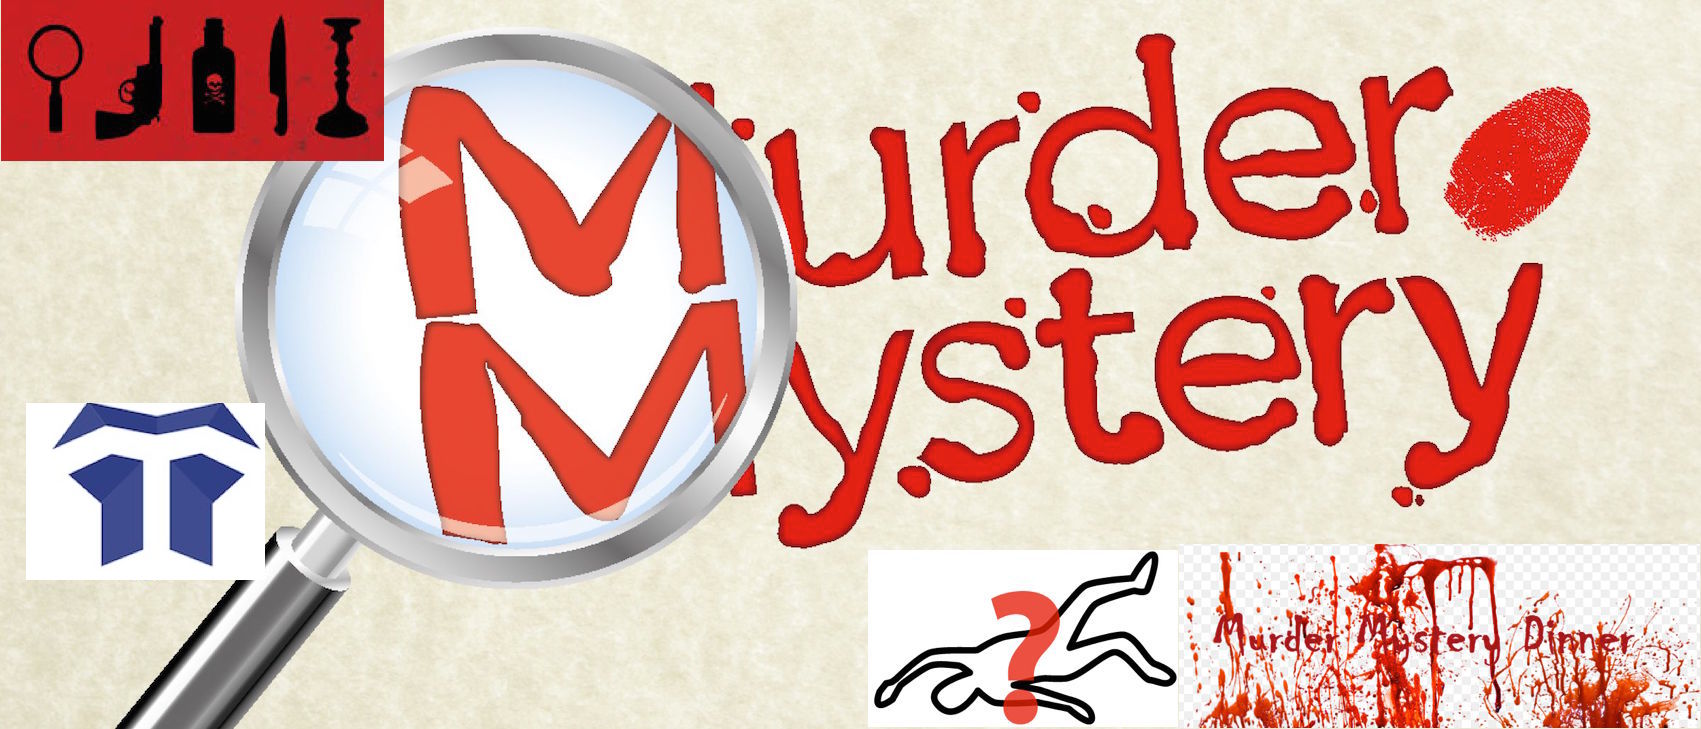 Murder Mystery hosted group and Thrilling team building activities over dinner and drinks at Restaurants and Hotels or Resorts